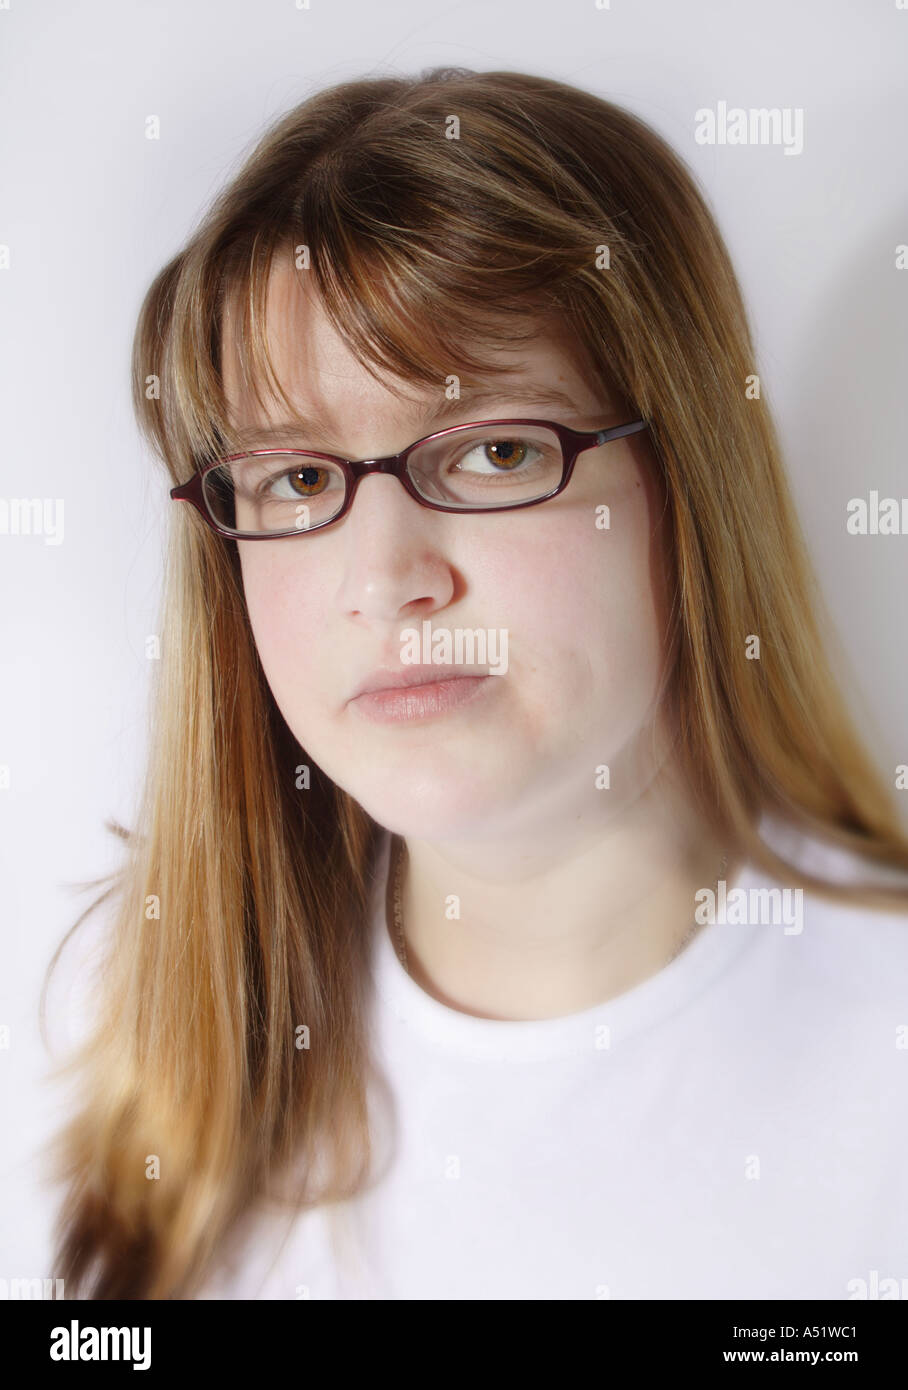 Young woman in her 20s with glasses looking pensive and serious Stock Photo